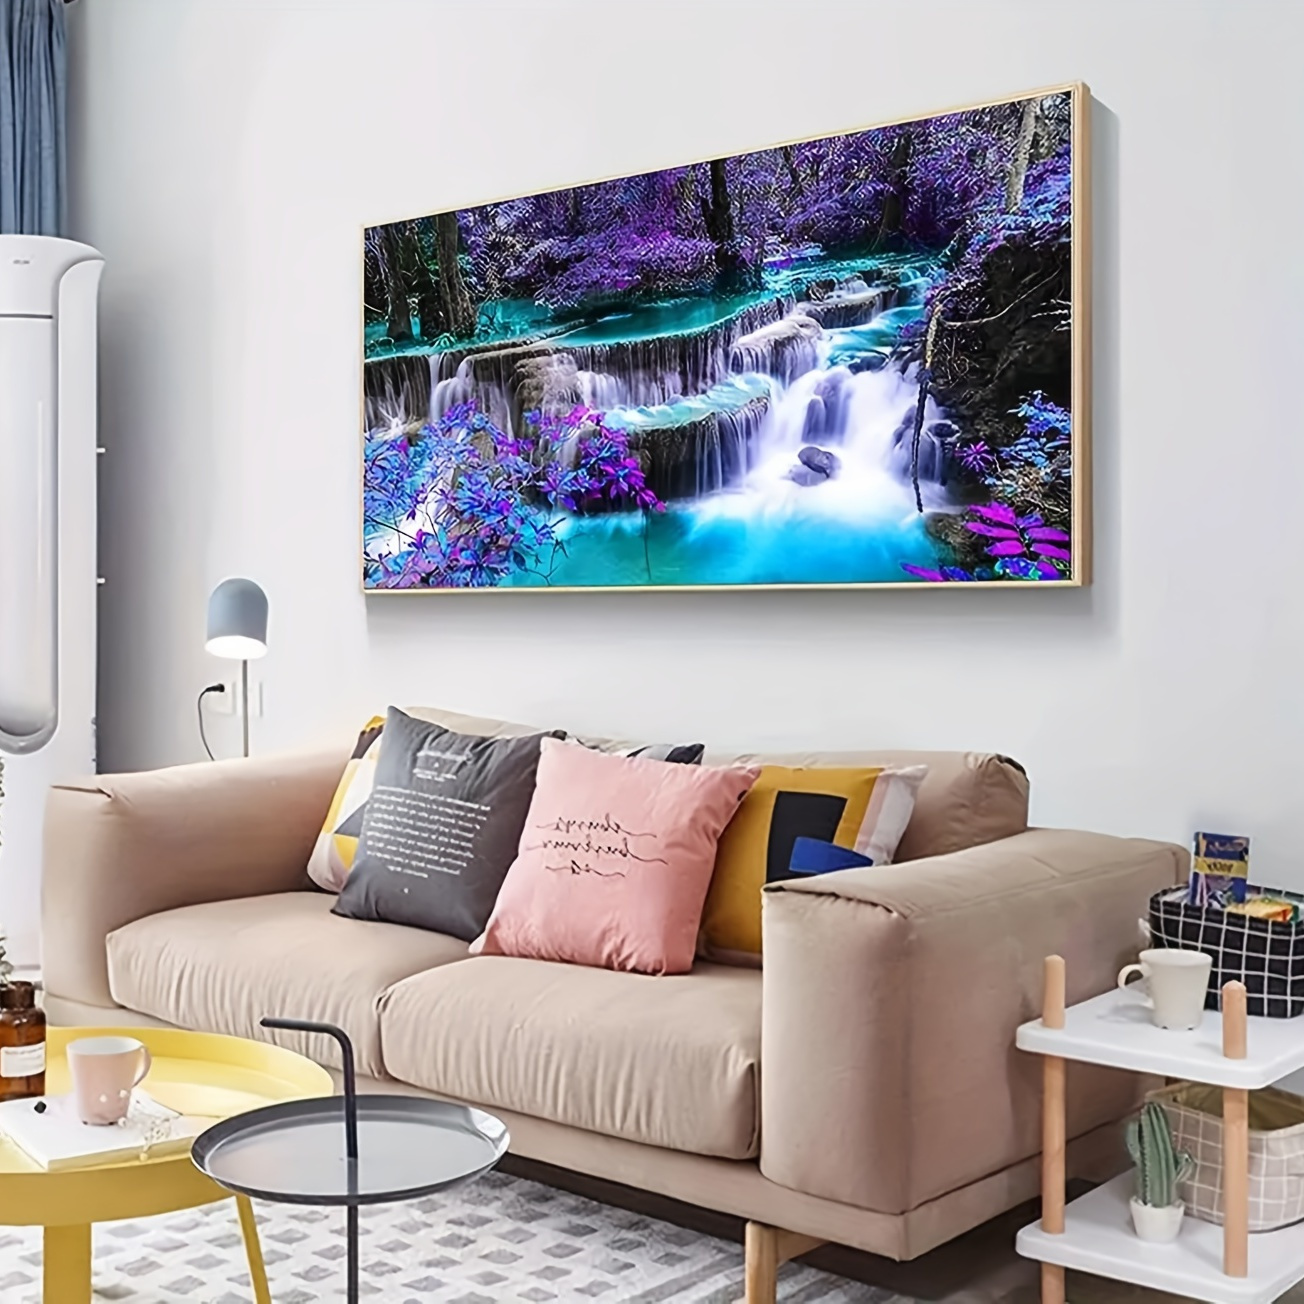 

5d Diy Artificial Diamond Painting Waterfall Diamond Painting For Living Room Bedroom Decor 40*16in/100x40cm